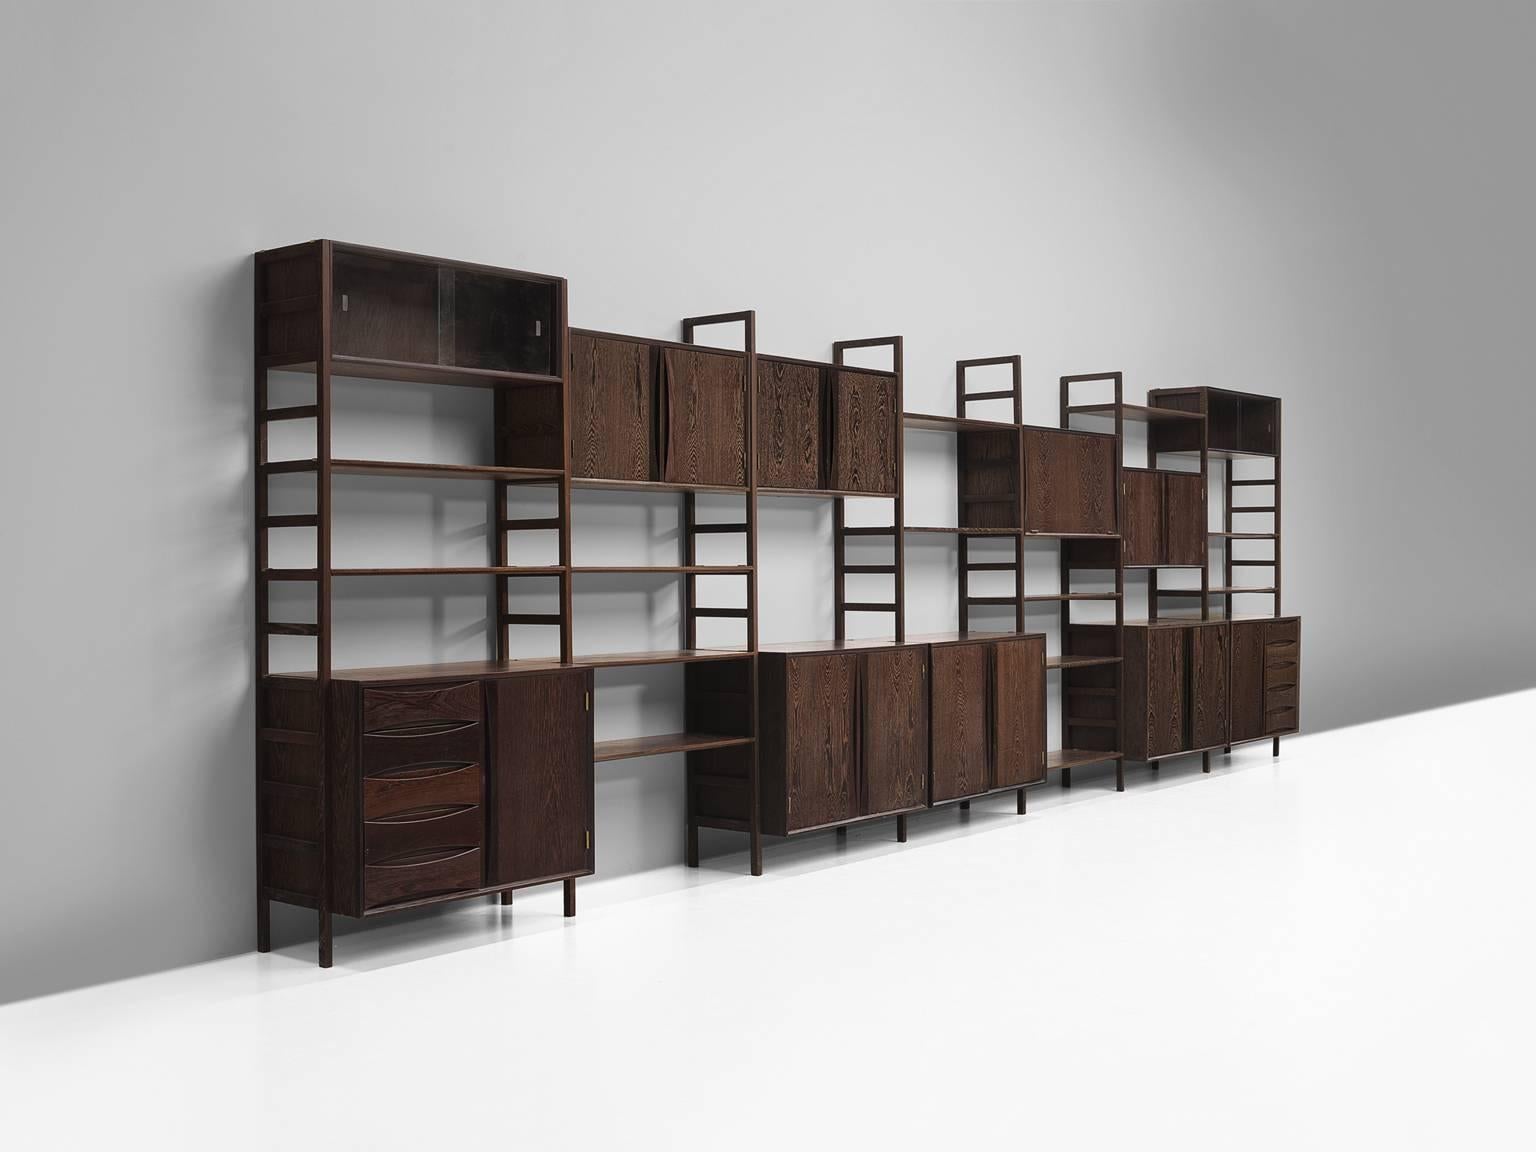 Wall unit, wenge and brass details, attributed to Oswald Vermaercke, Belgium, 1960s.

This wall unit represents the best of rich and solid material on the one hand and simplistic, balanced Belgian aesthetics on the other. The unit consists of three